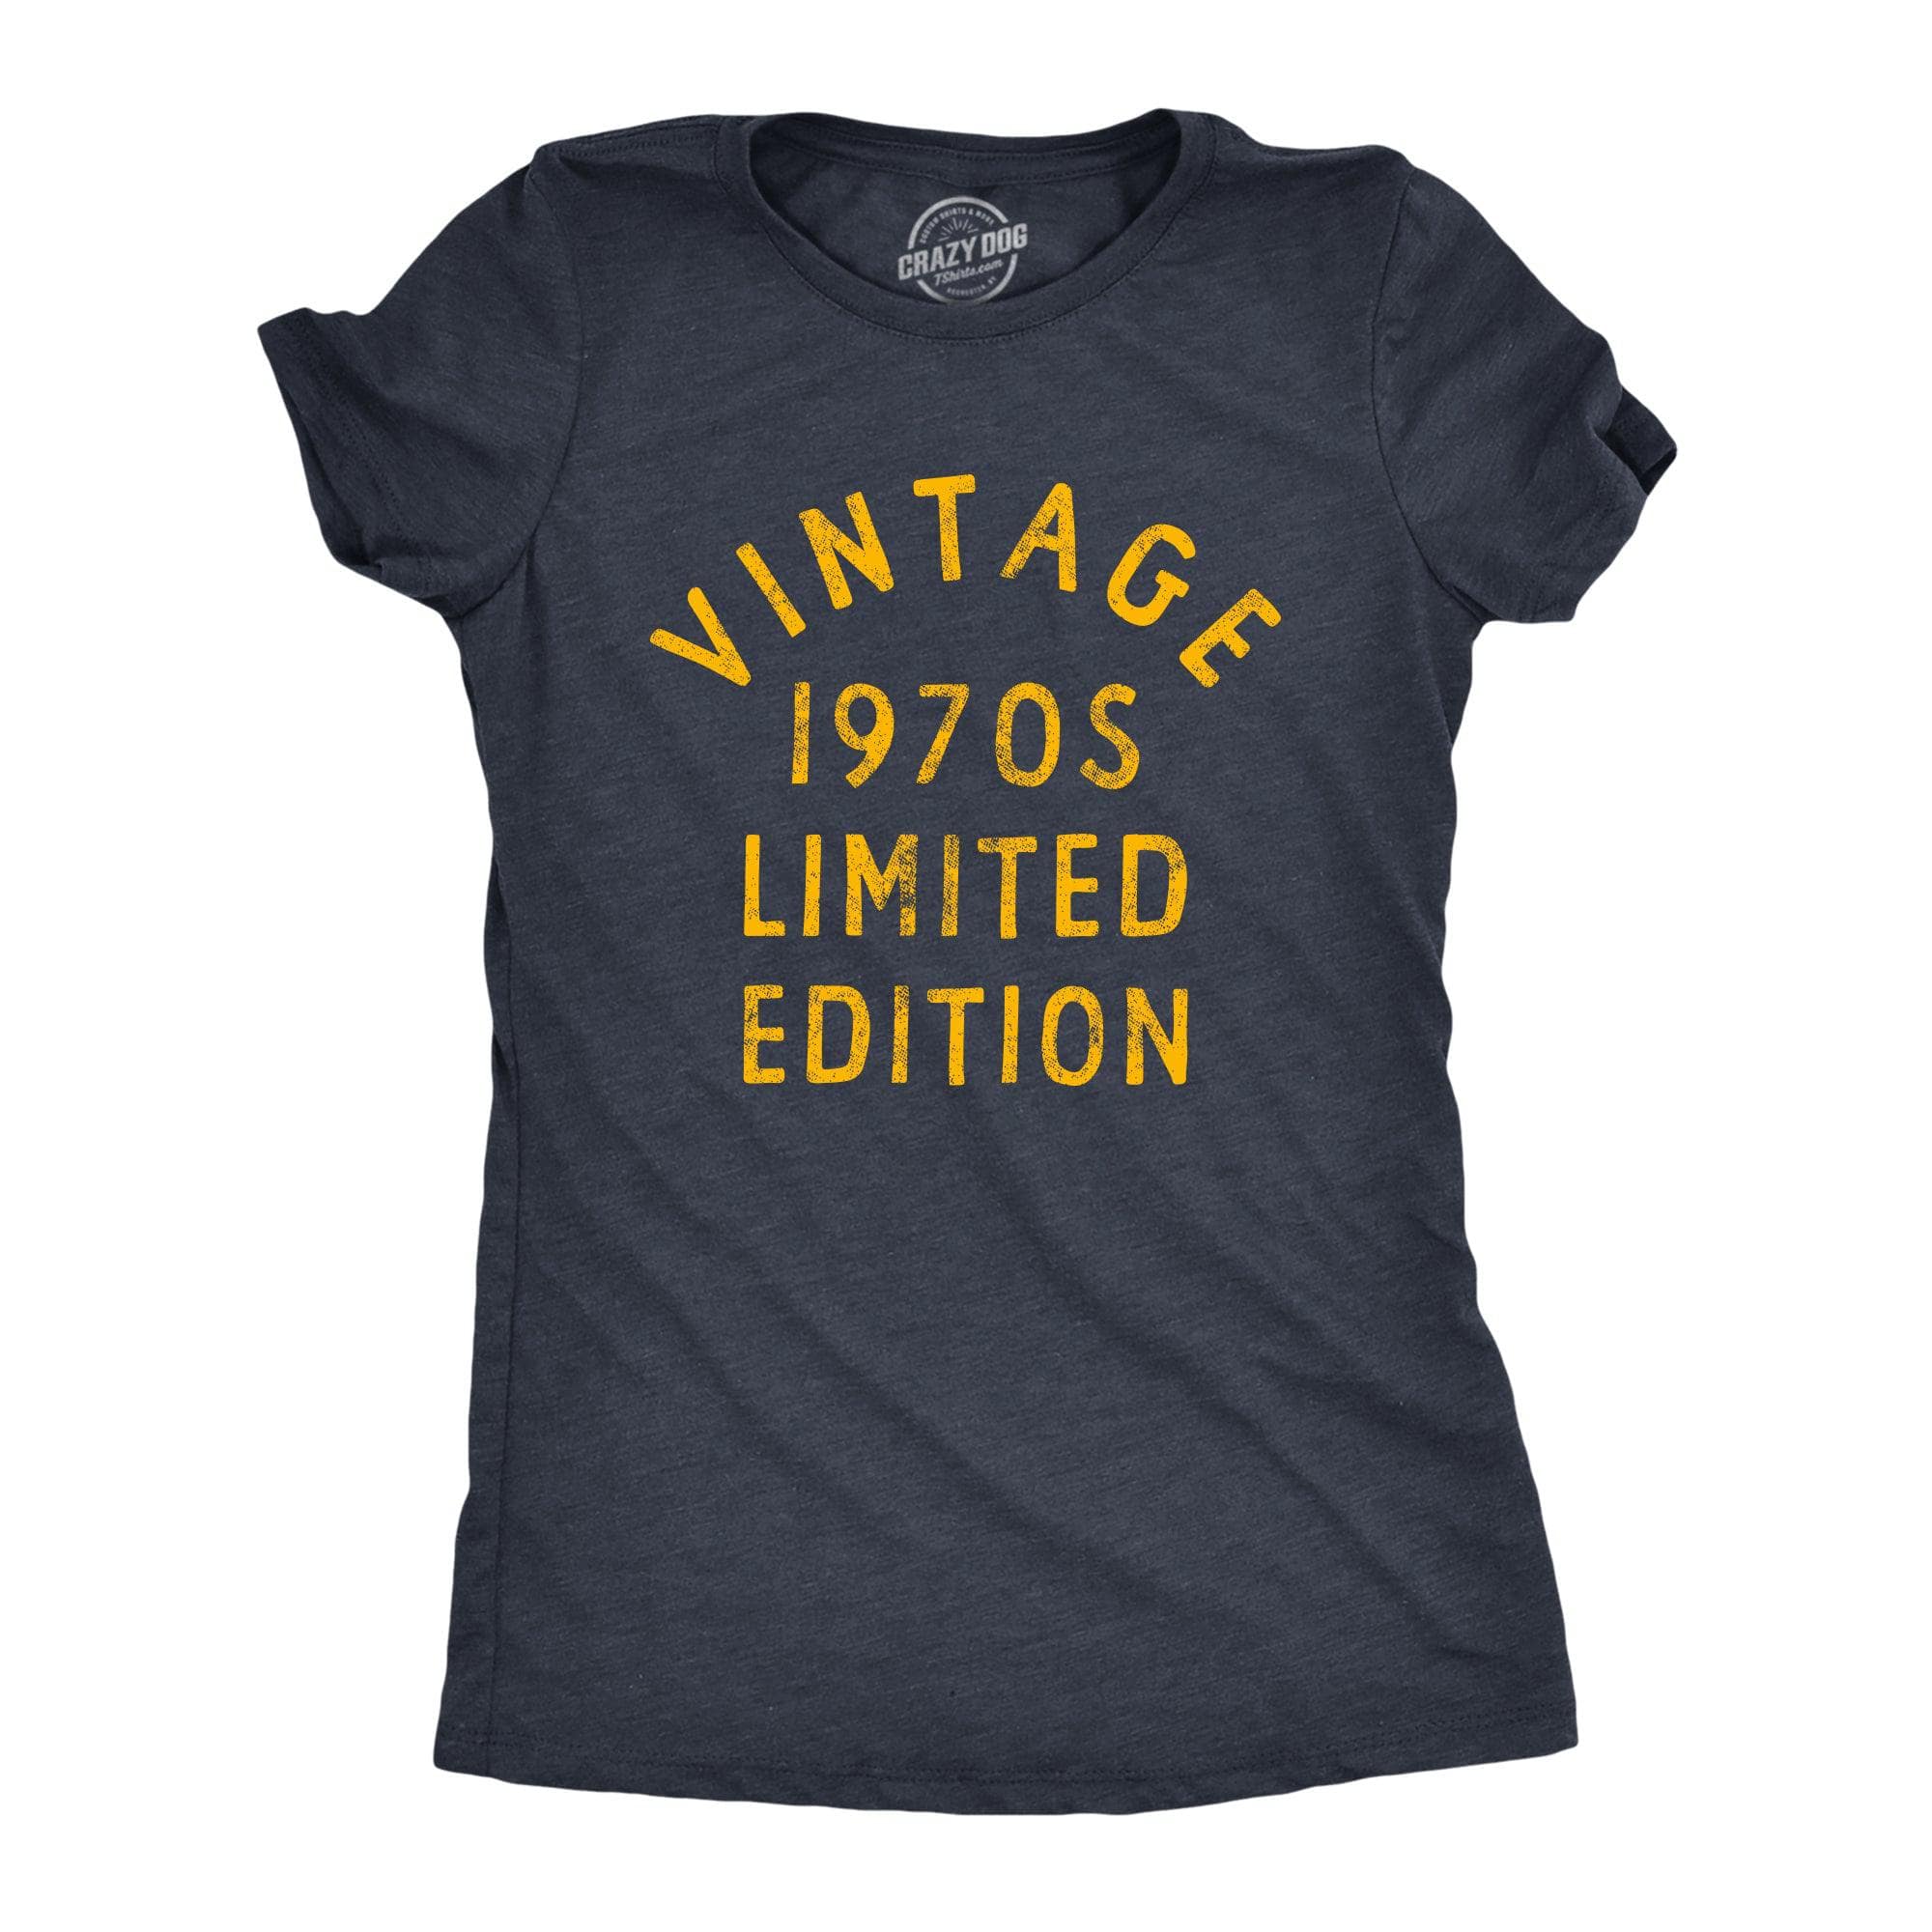 Vintage 1970s Limited Edition Women's Tshirt  -  Crazy Dog T-Shirts